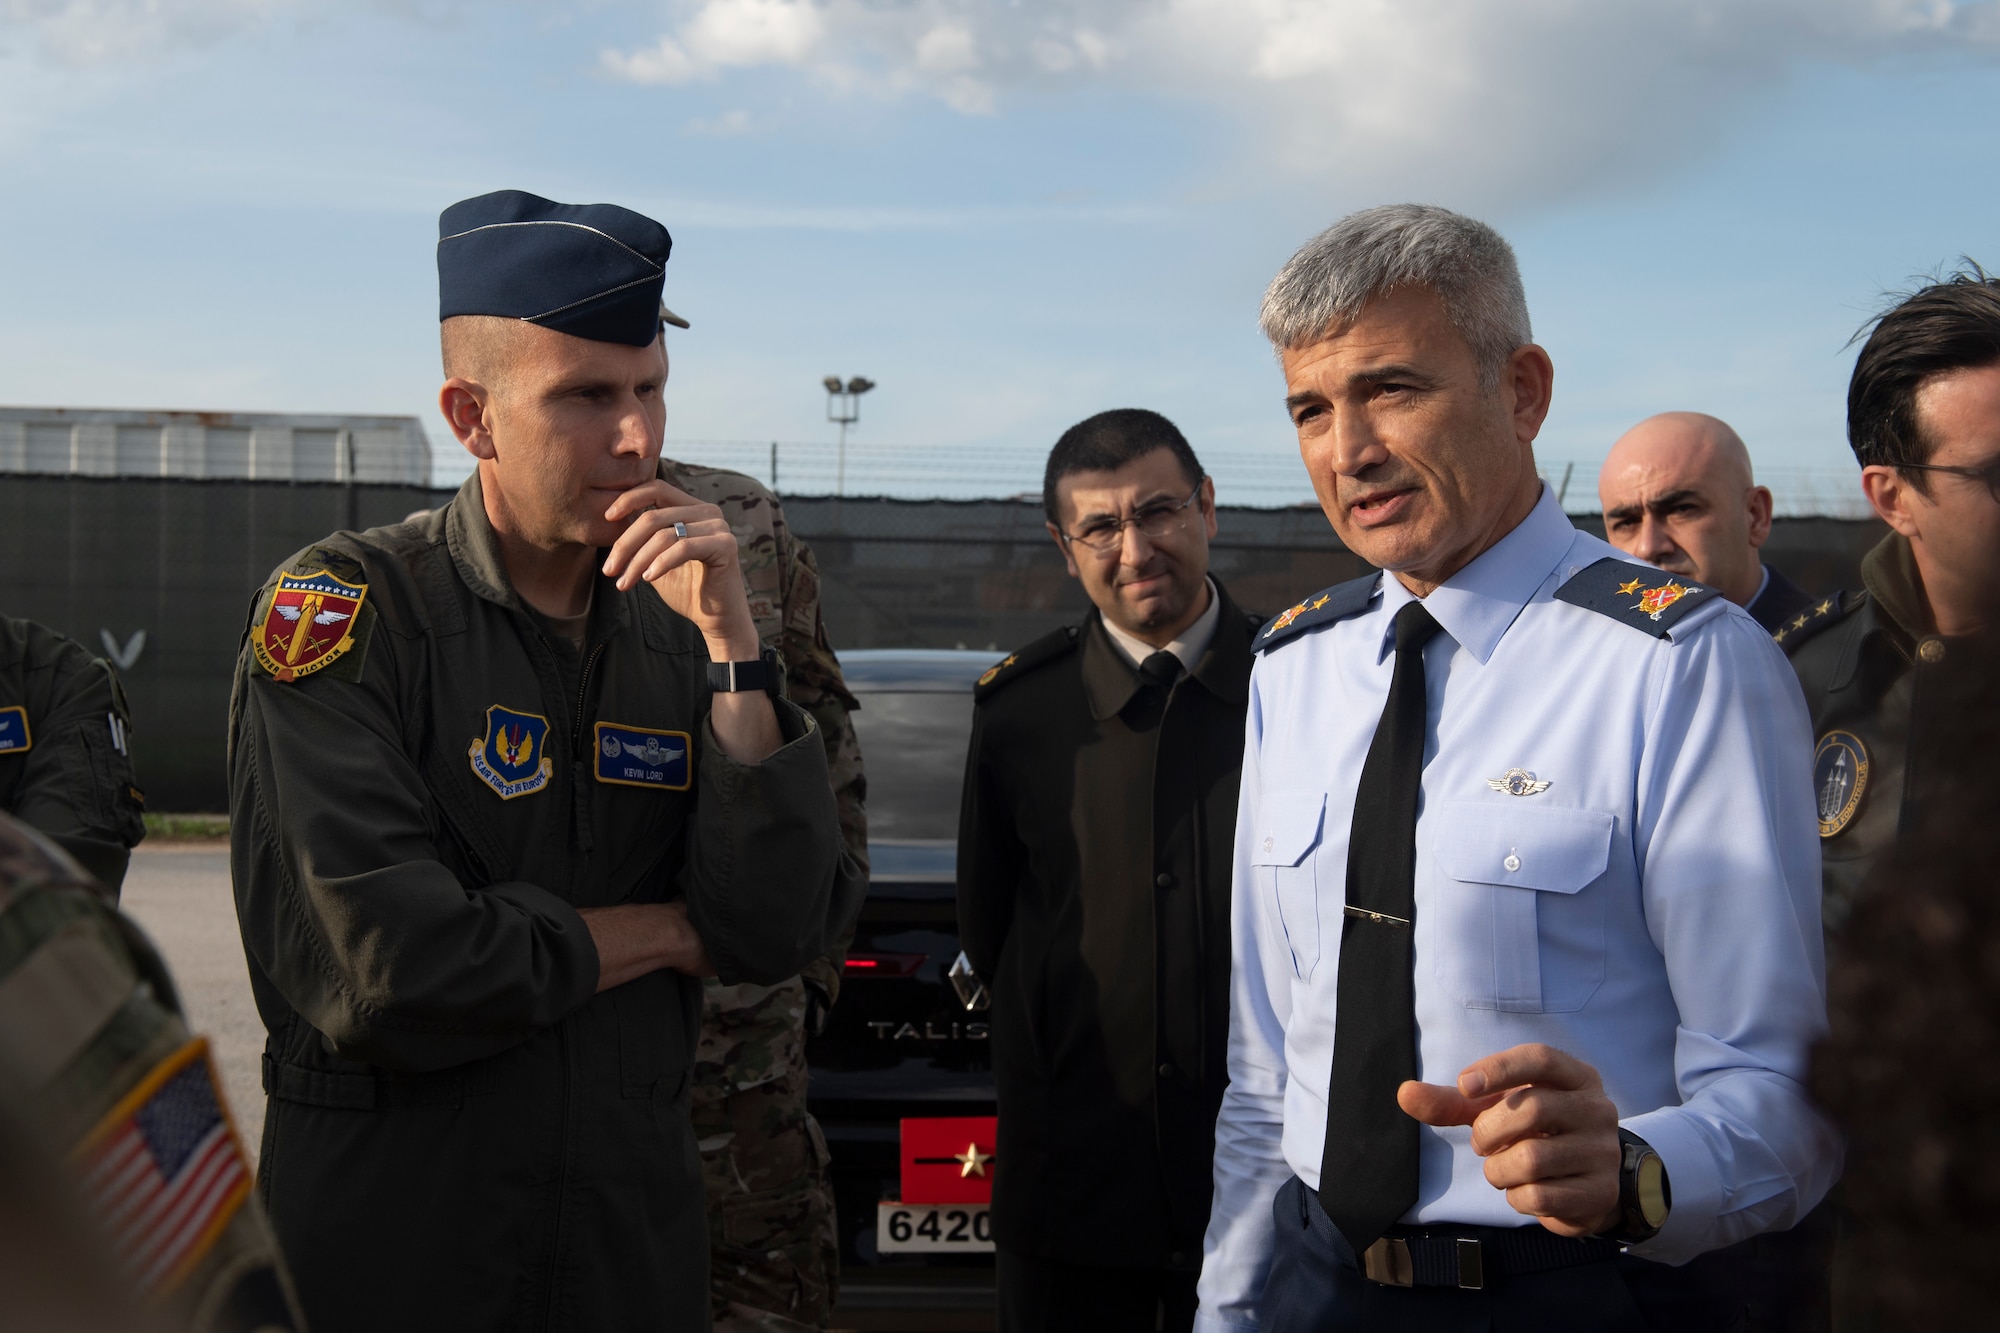 A U.S. Air Force Lt. Col. listens to a Turkish Air Force General speak.